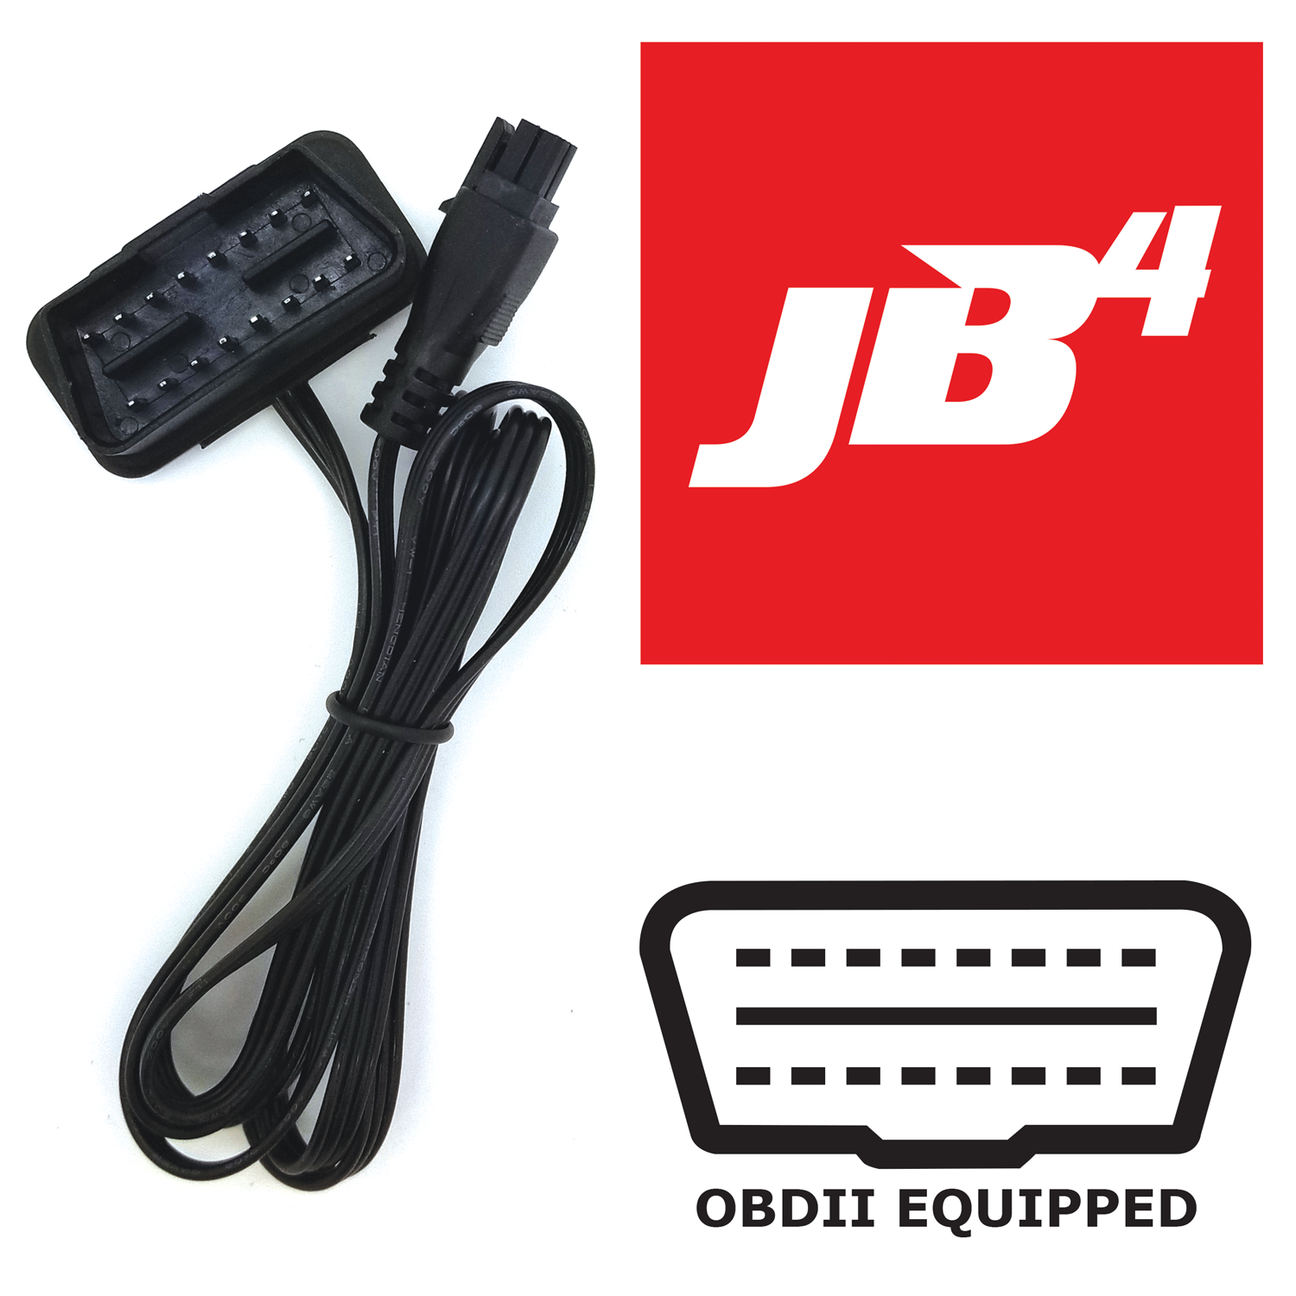 JB4 Tuner for 2010+ Ford Taurus SHO - 0